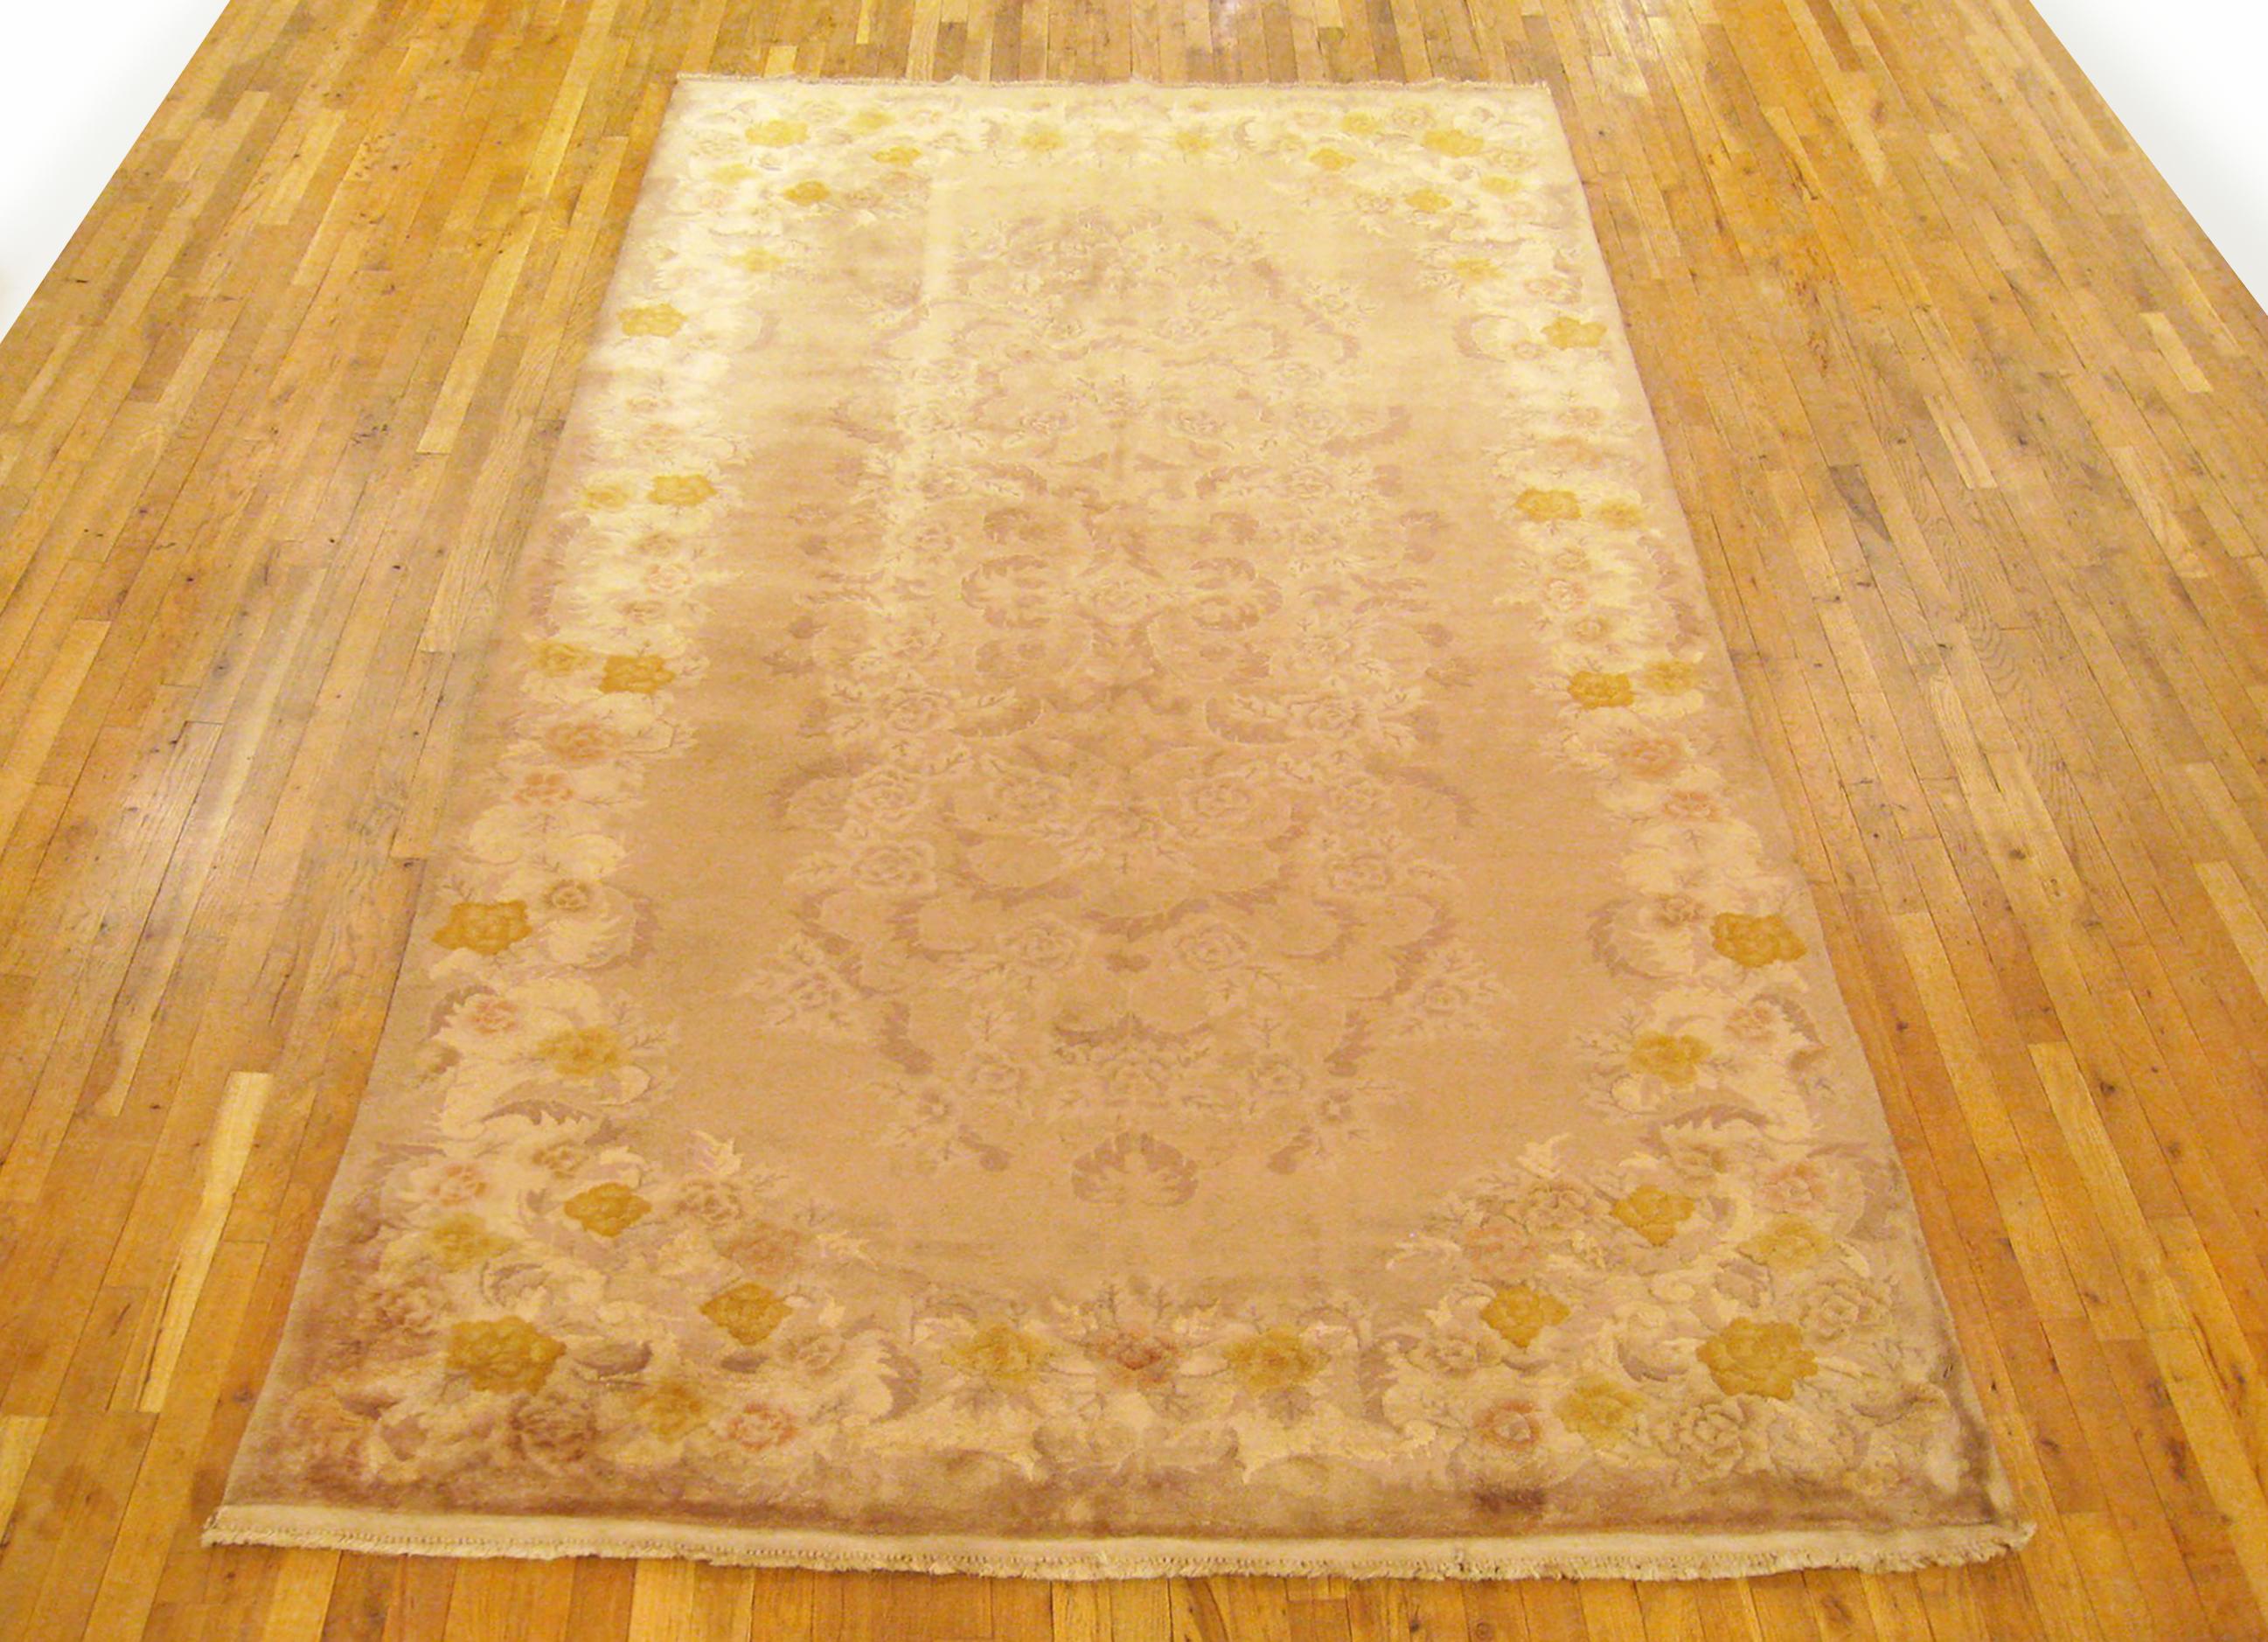 Vintage Chinese Art Deco Rug, Gallery size, circa 1940

A one-of-a-kind antique Chinese Art Deco oriental carpet, hand-knotted with medium thickness wool pile. This beautiful hand-knotted rug features floral elements in a large brown open field,